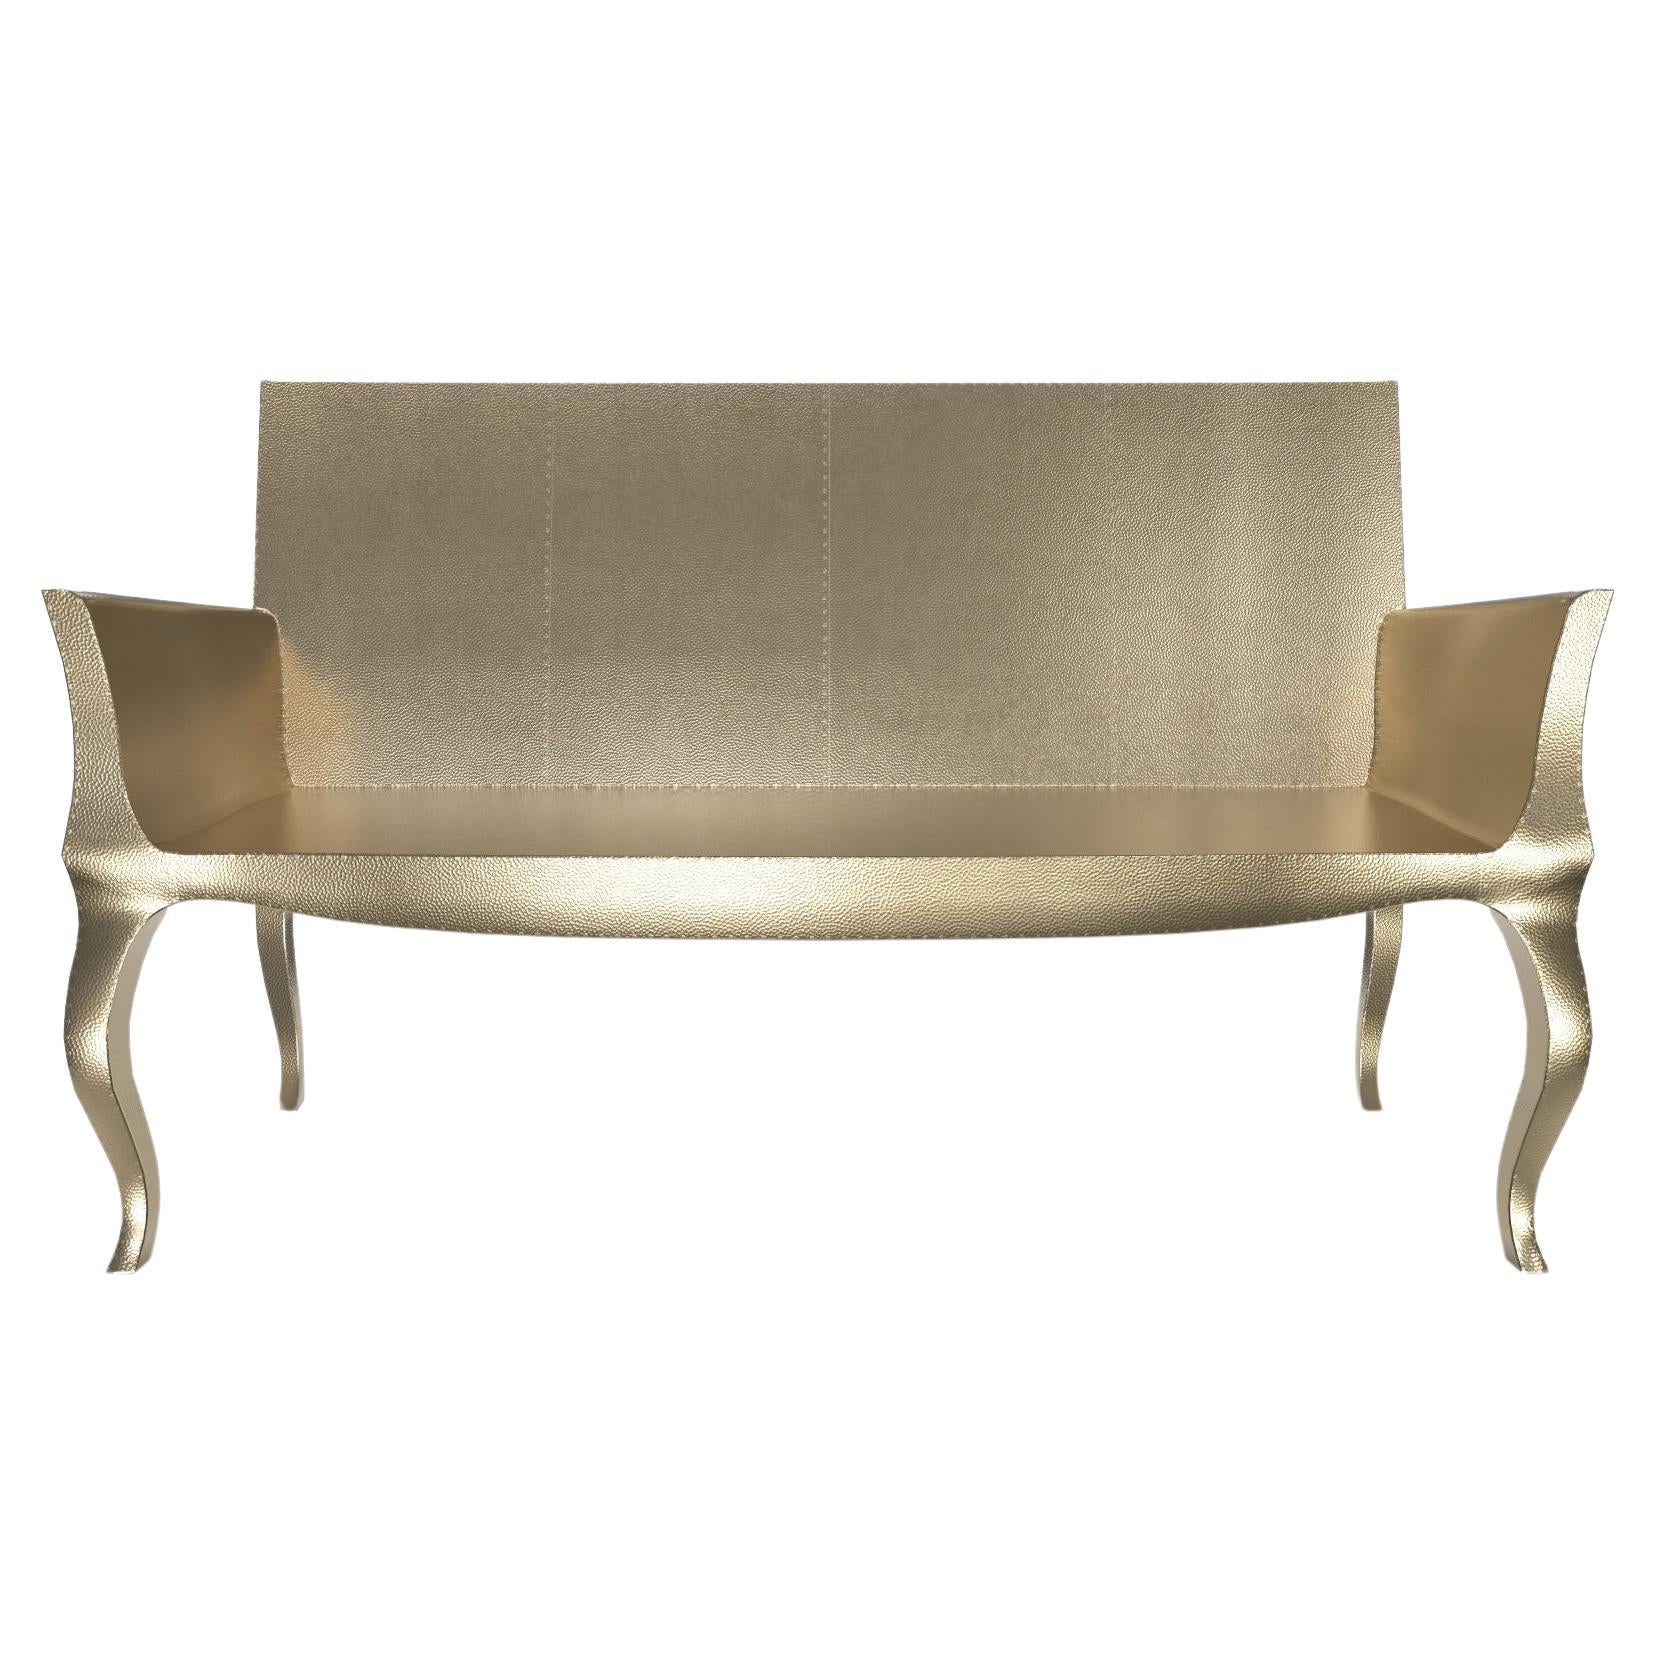 Louise Settee Art Deco Loveseats in Mid. Hammered Brass by Paul Mathieu For Sale